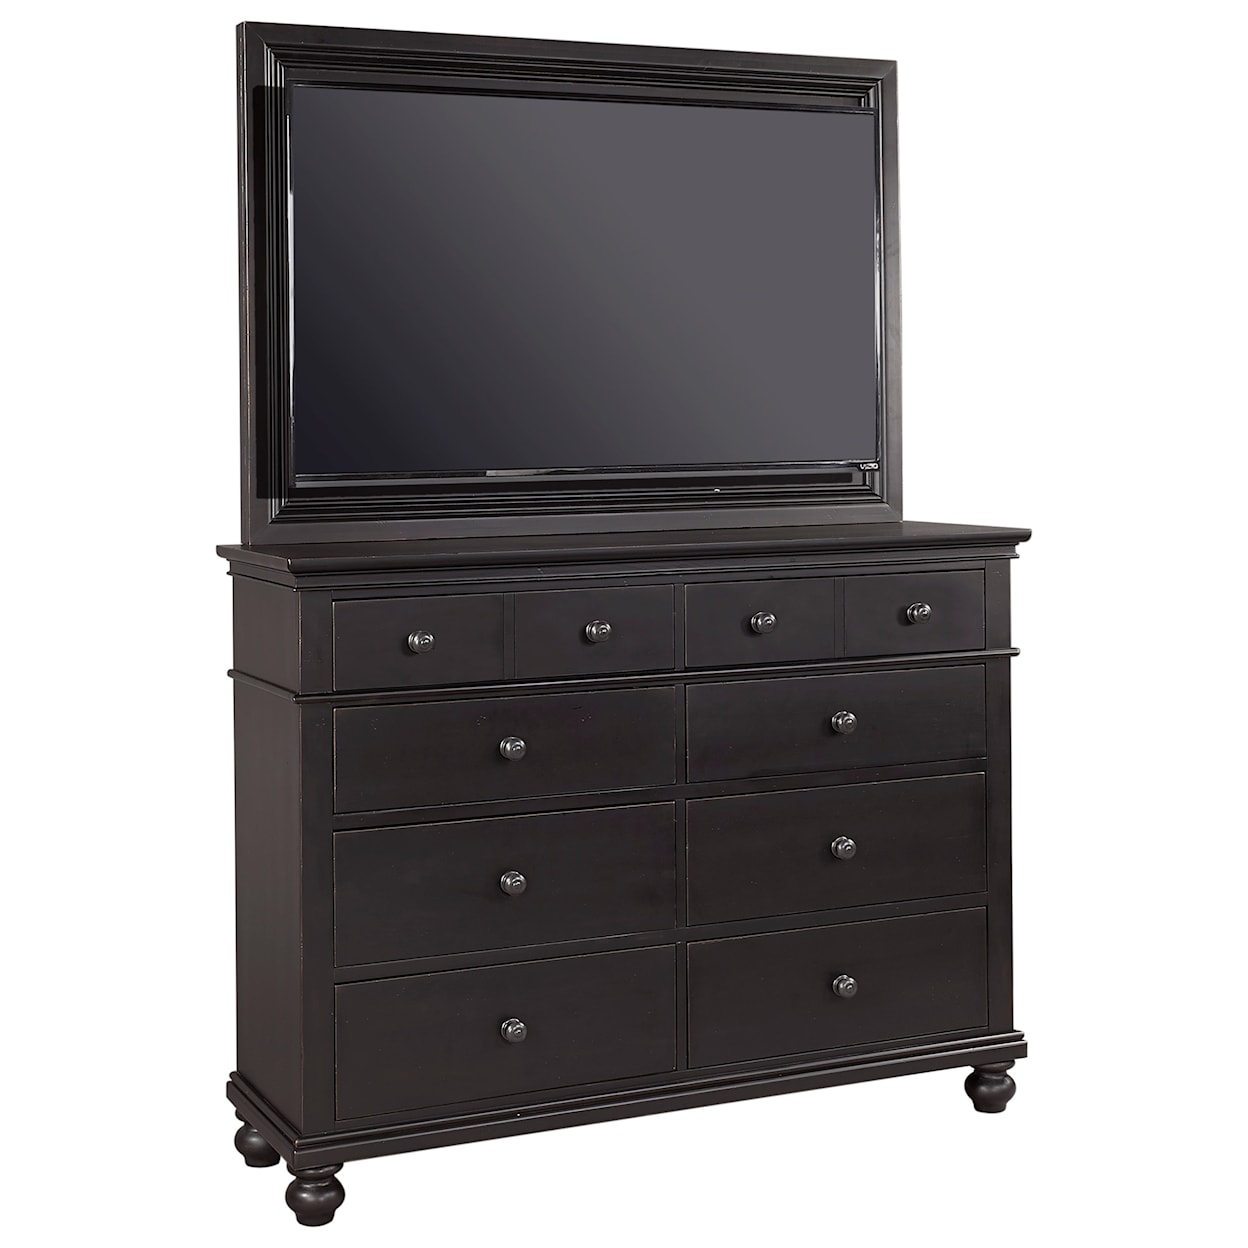 Aspenhome Oxford Media Chest with TV Mount